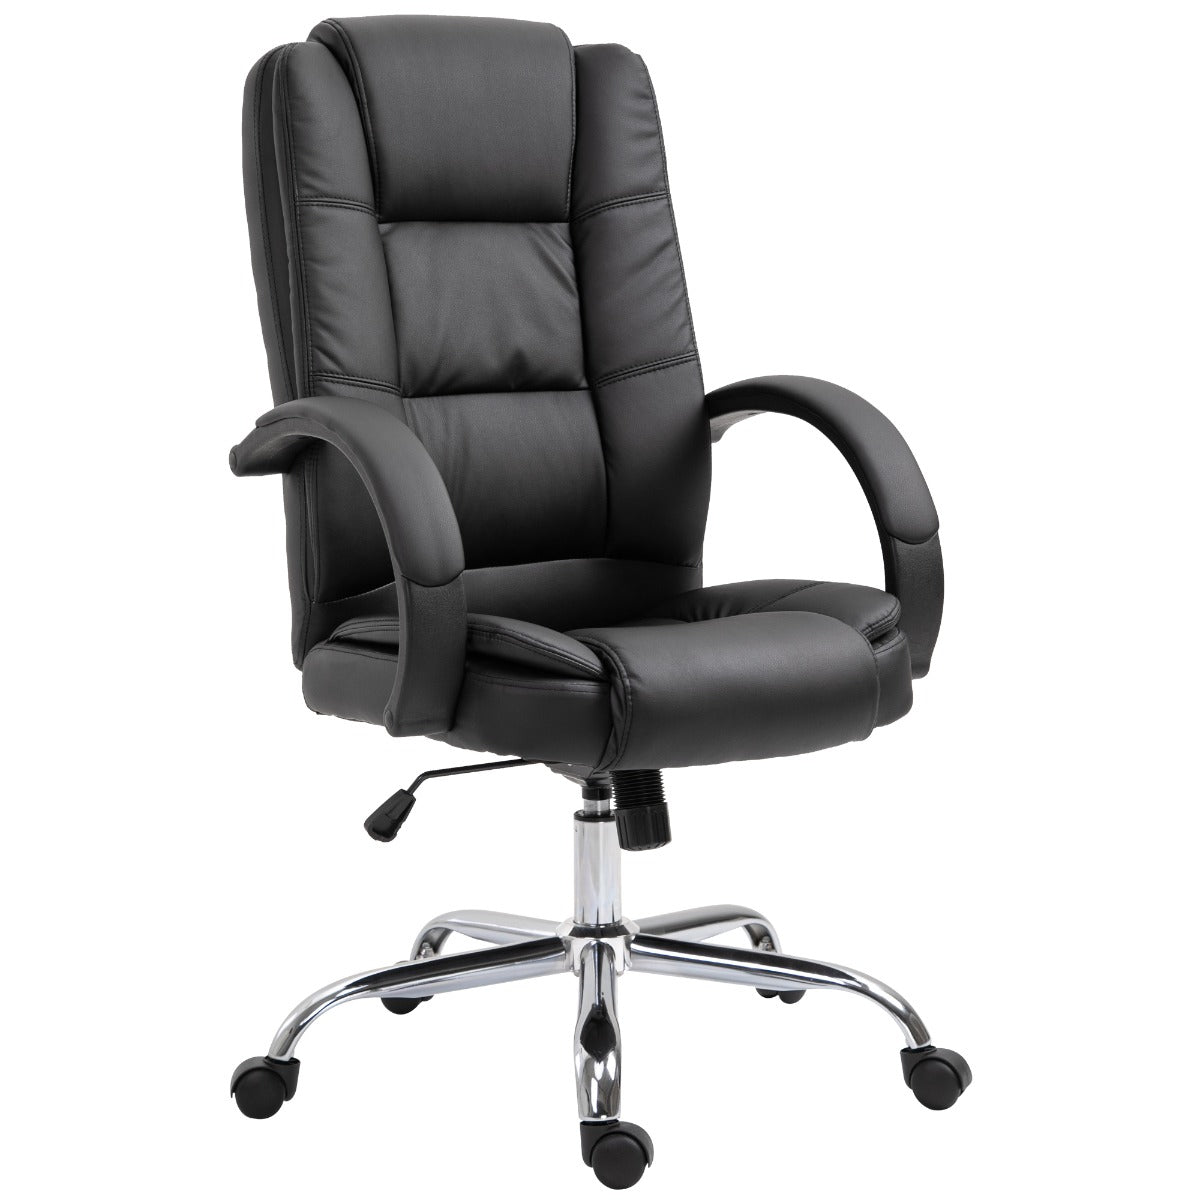 Vinsetto High Back Executive Office Chair, 360° Swivel, PU Leather-Black